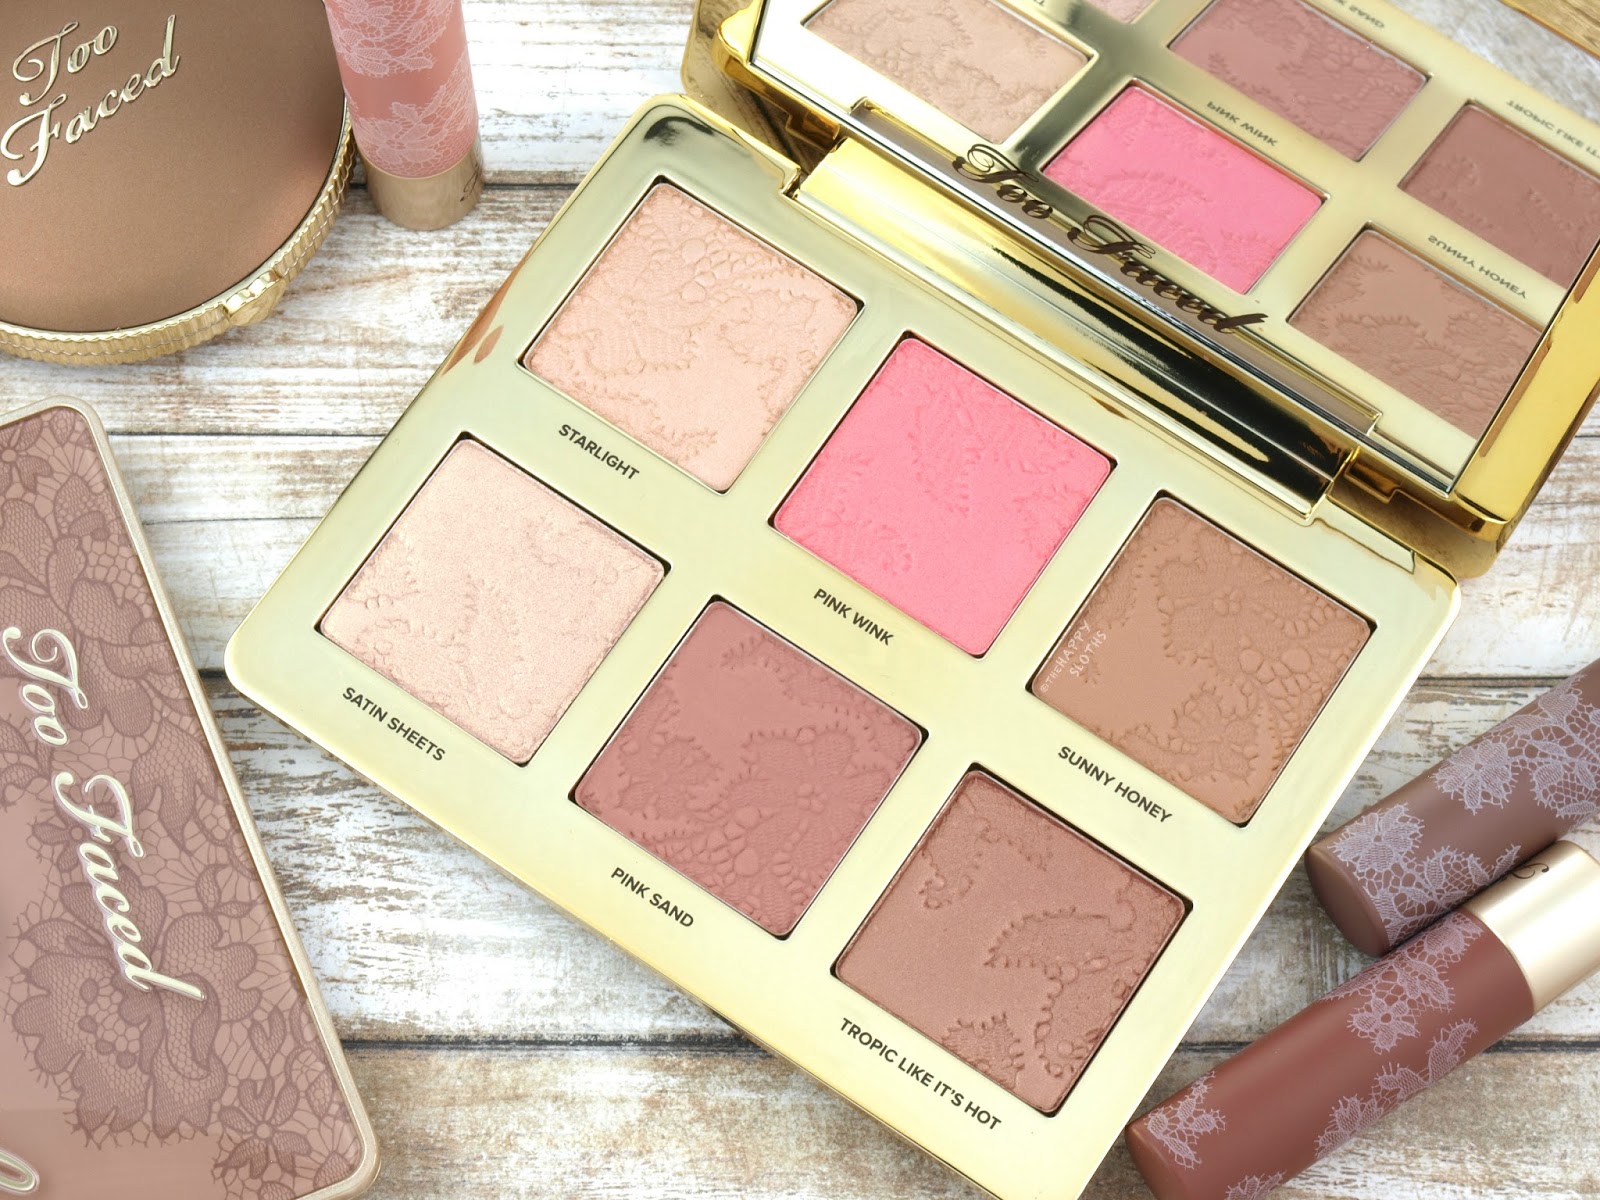 Too Faced Natural Face Makeup Palette: Review and Swatches